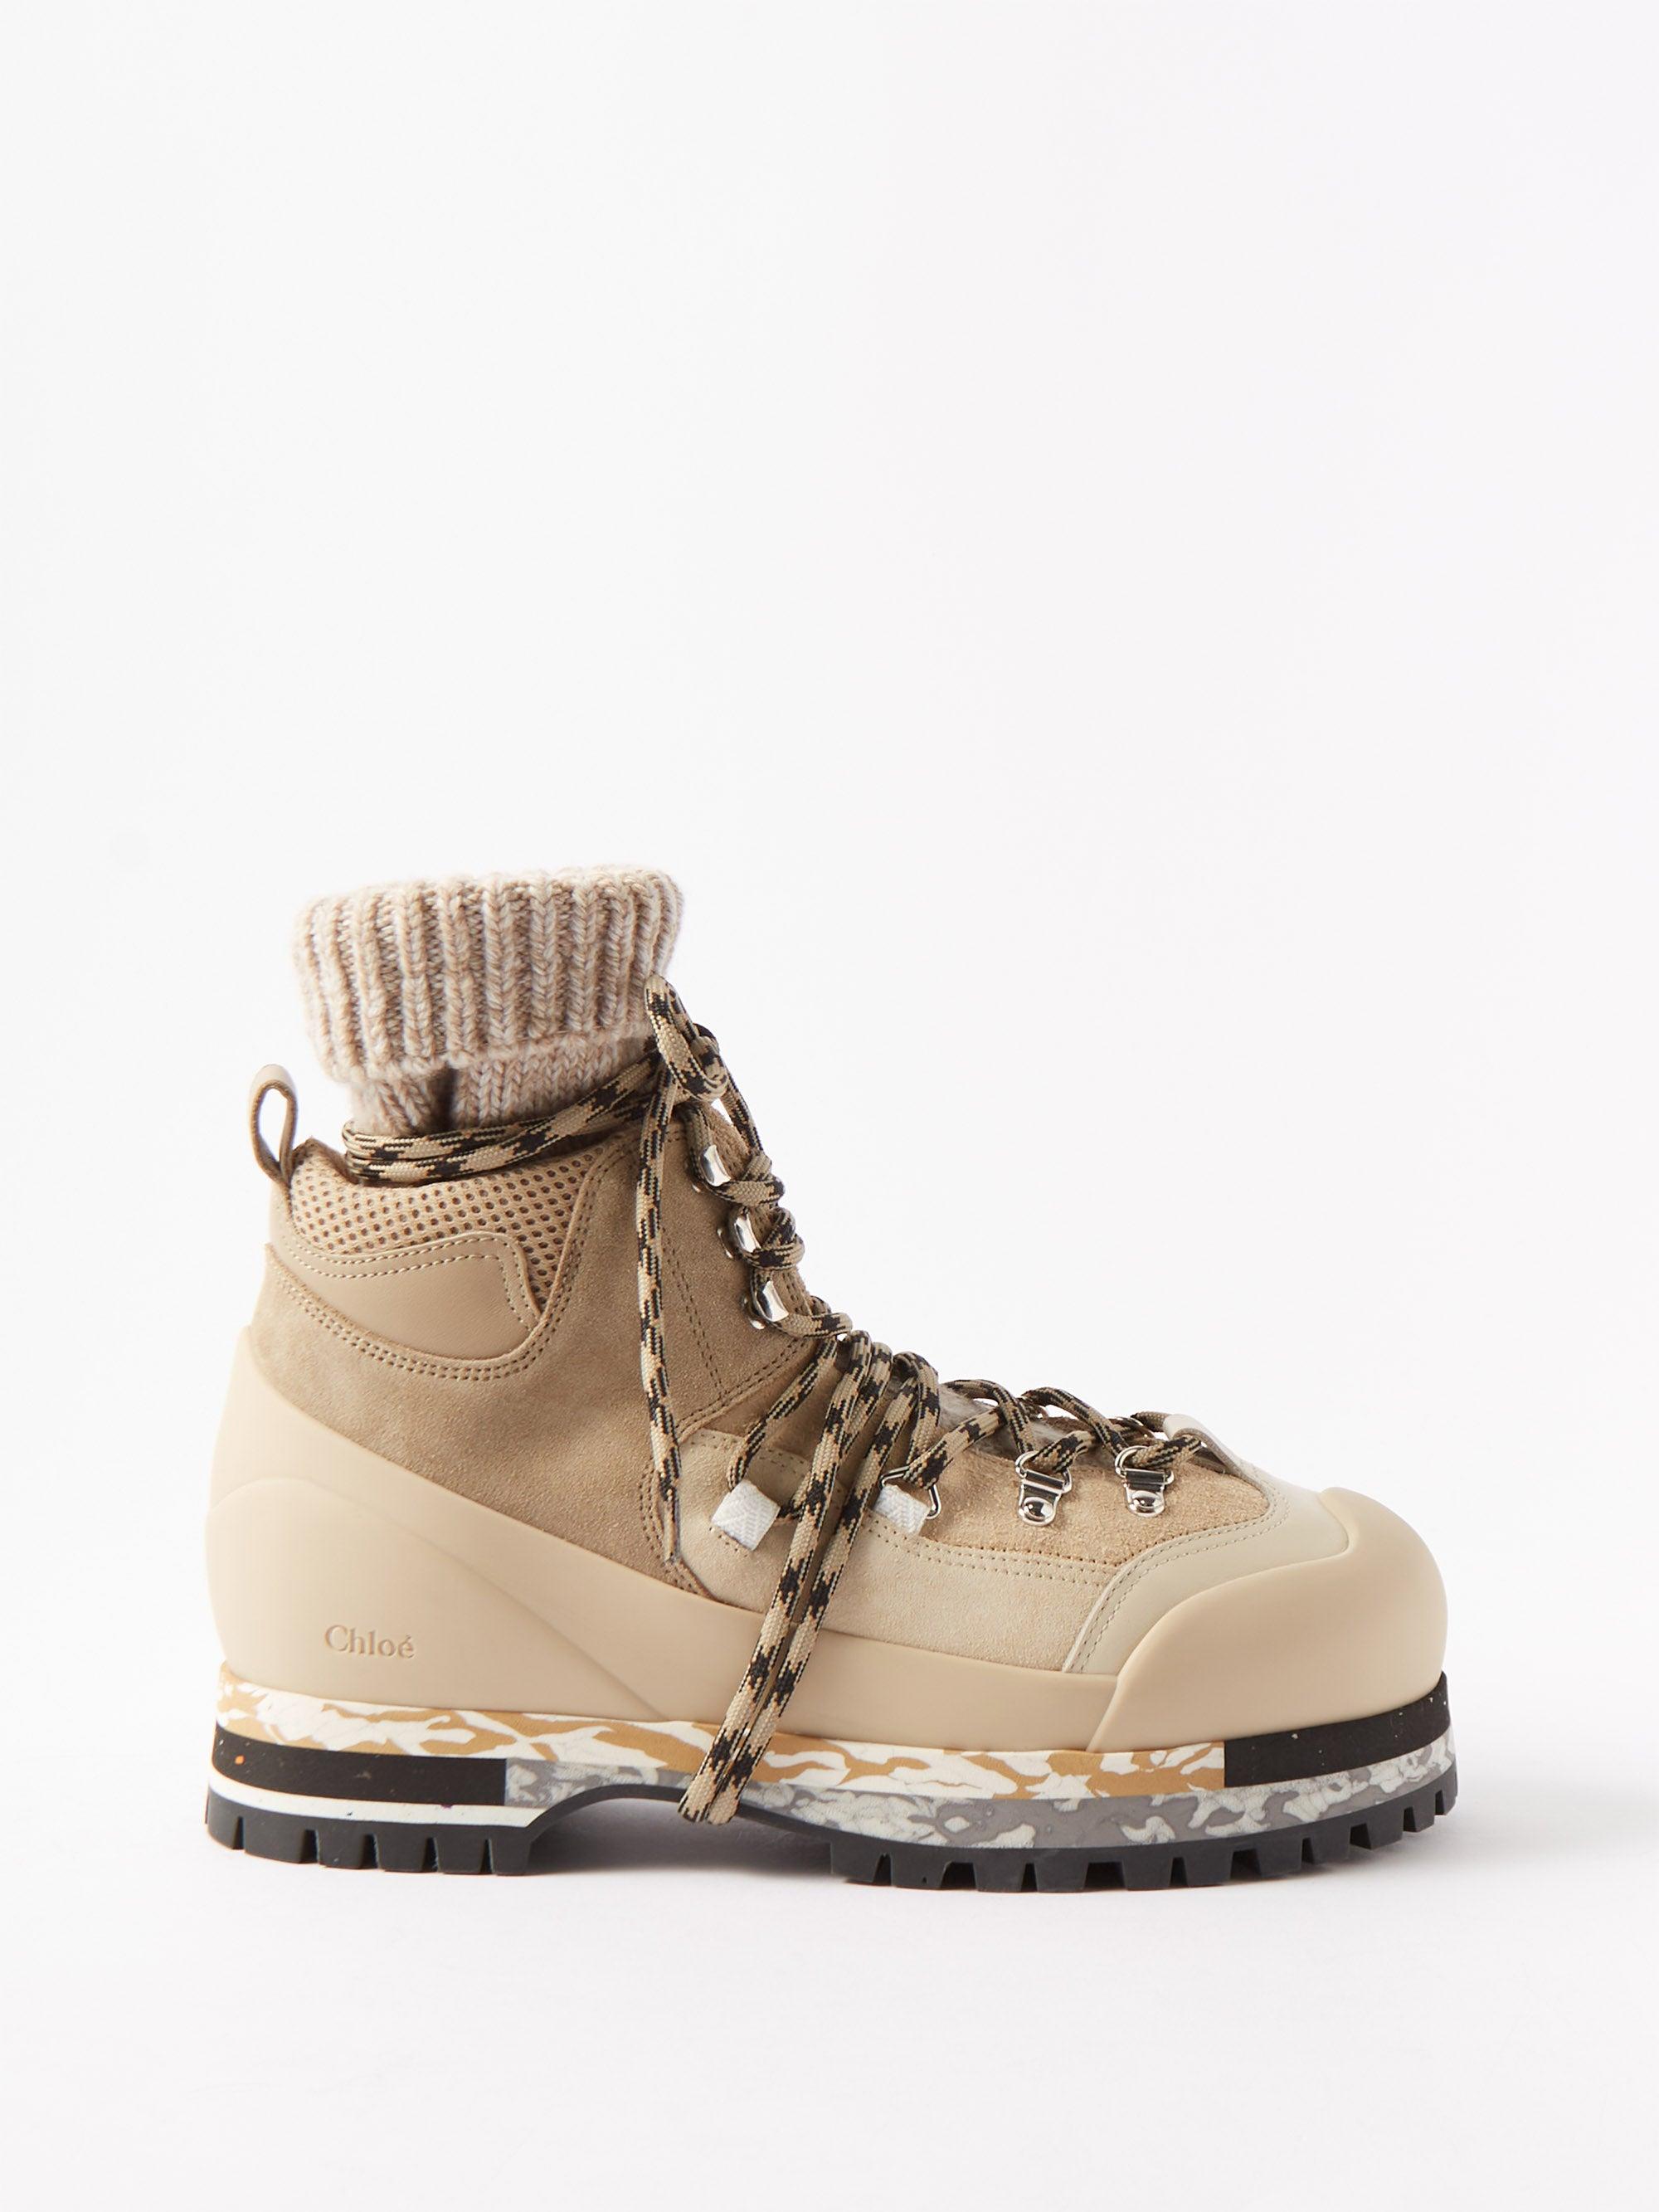 Chloé Nikie Ribbed-cuff Nubuck Boots in Natural | Lyst